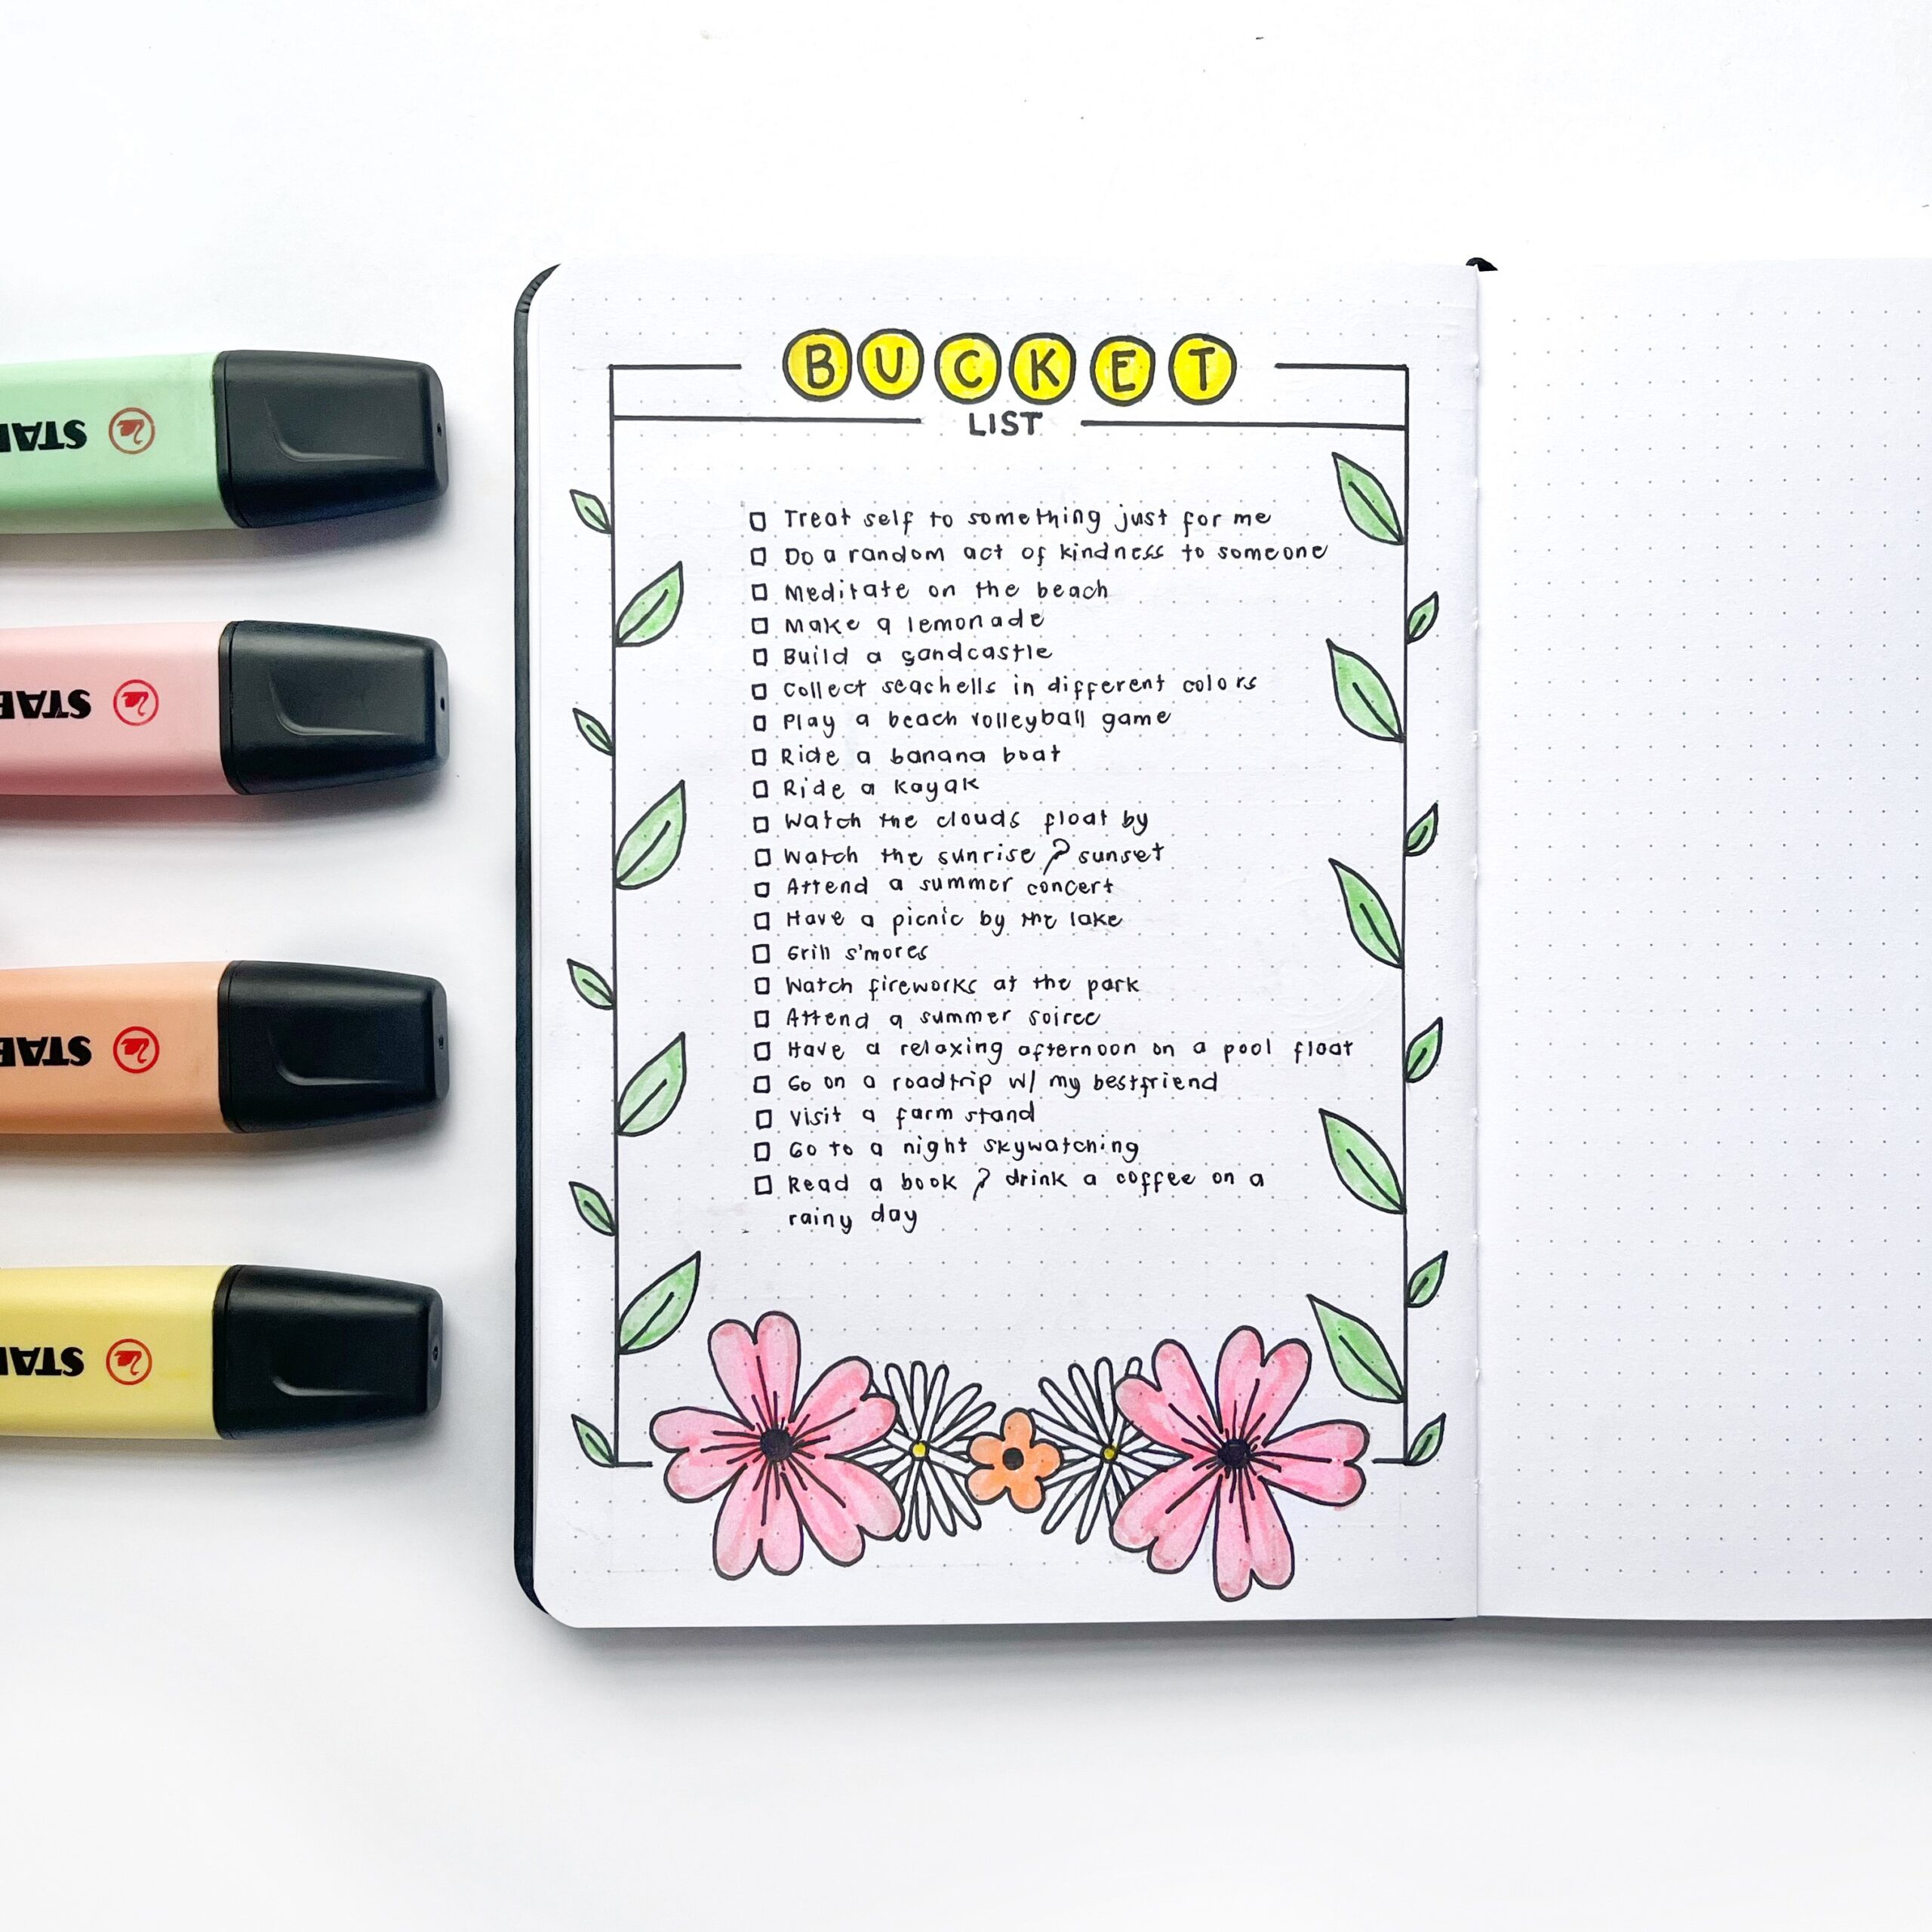 A bullet journal bucket list layout on the page of an open journal.